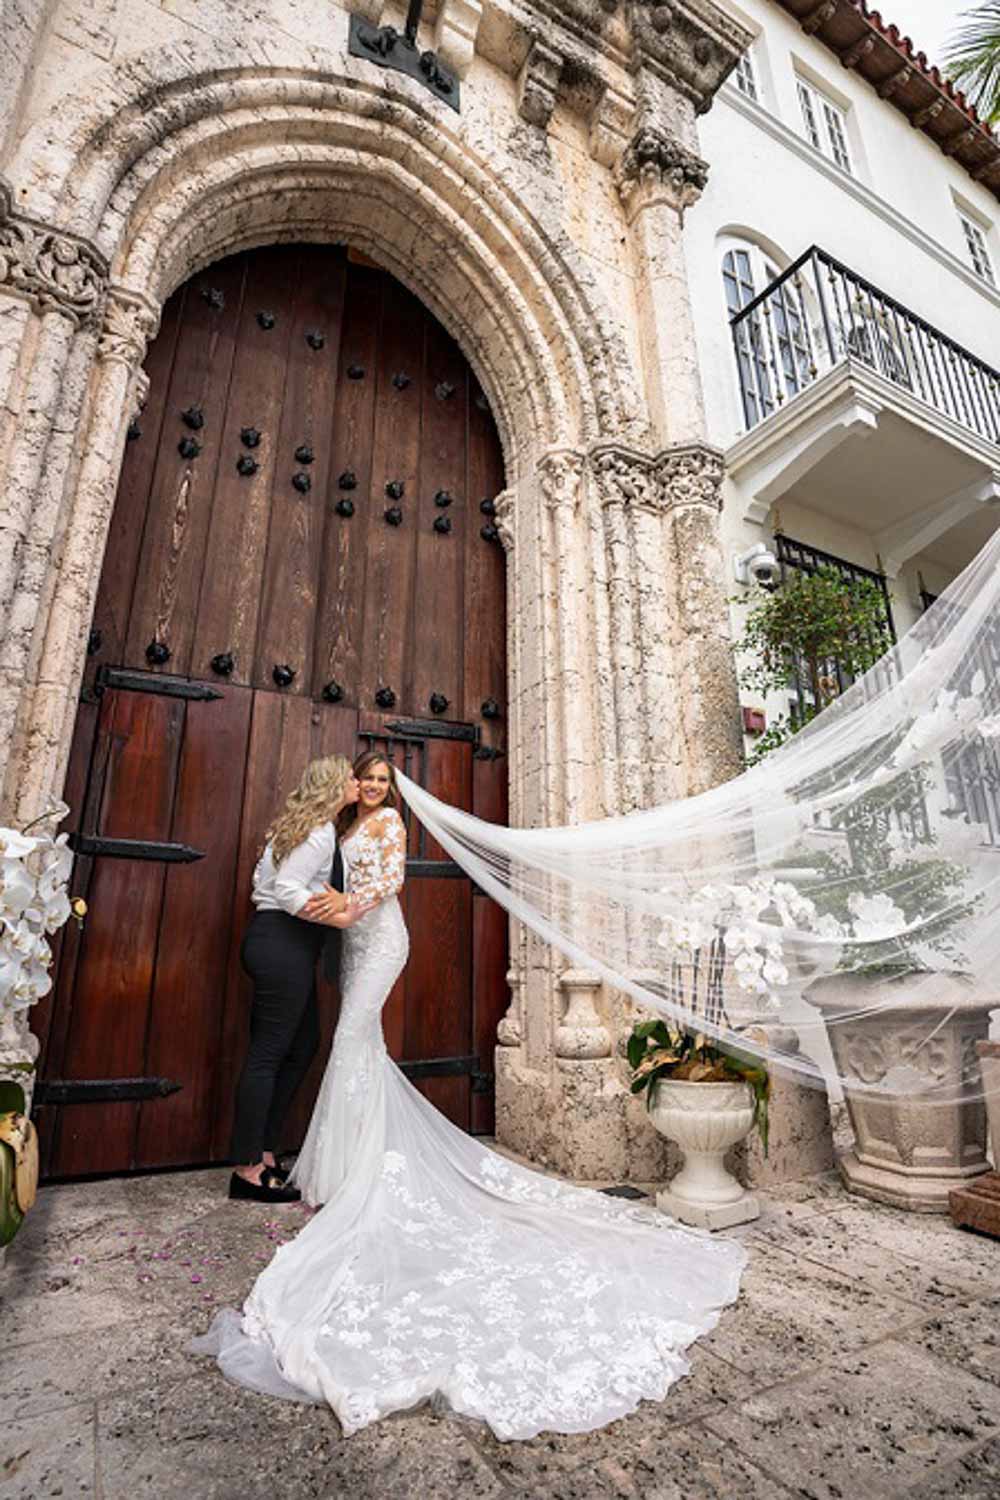 Angelina + Krista: Upscale glamorous lesbian wedding at the renowned Versace mansion in Miami Beach, Florida Suzanne Delawar Studios brides veil in the wind